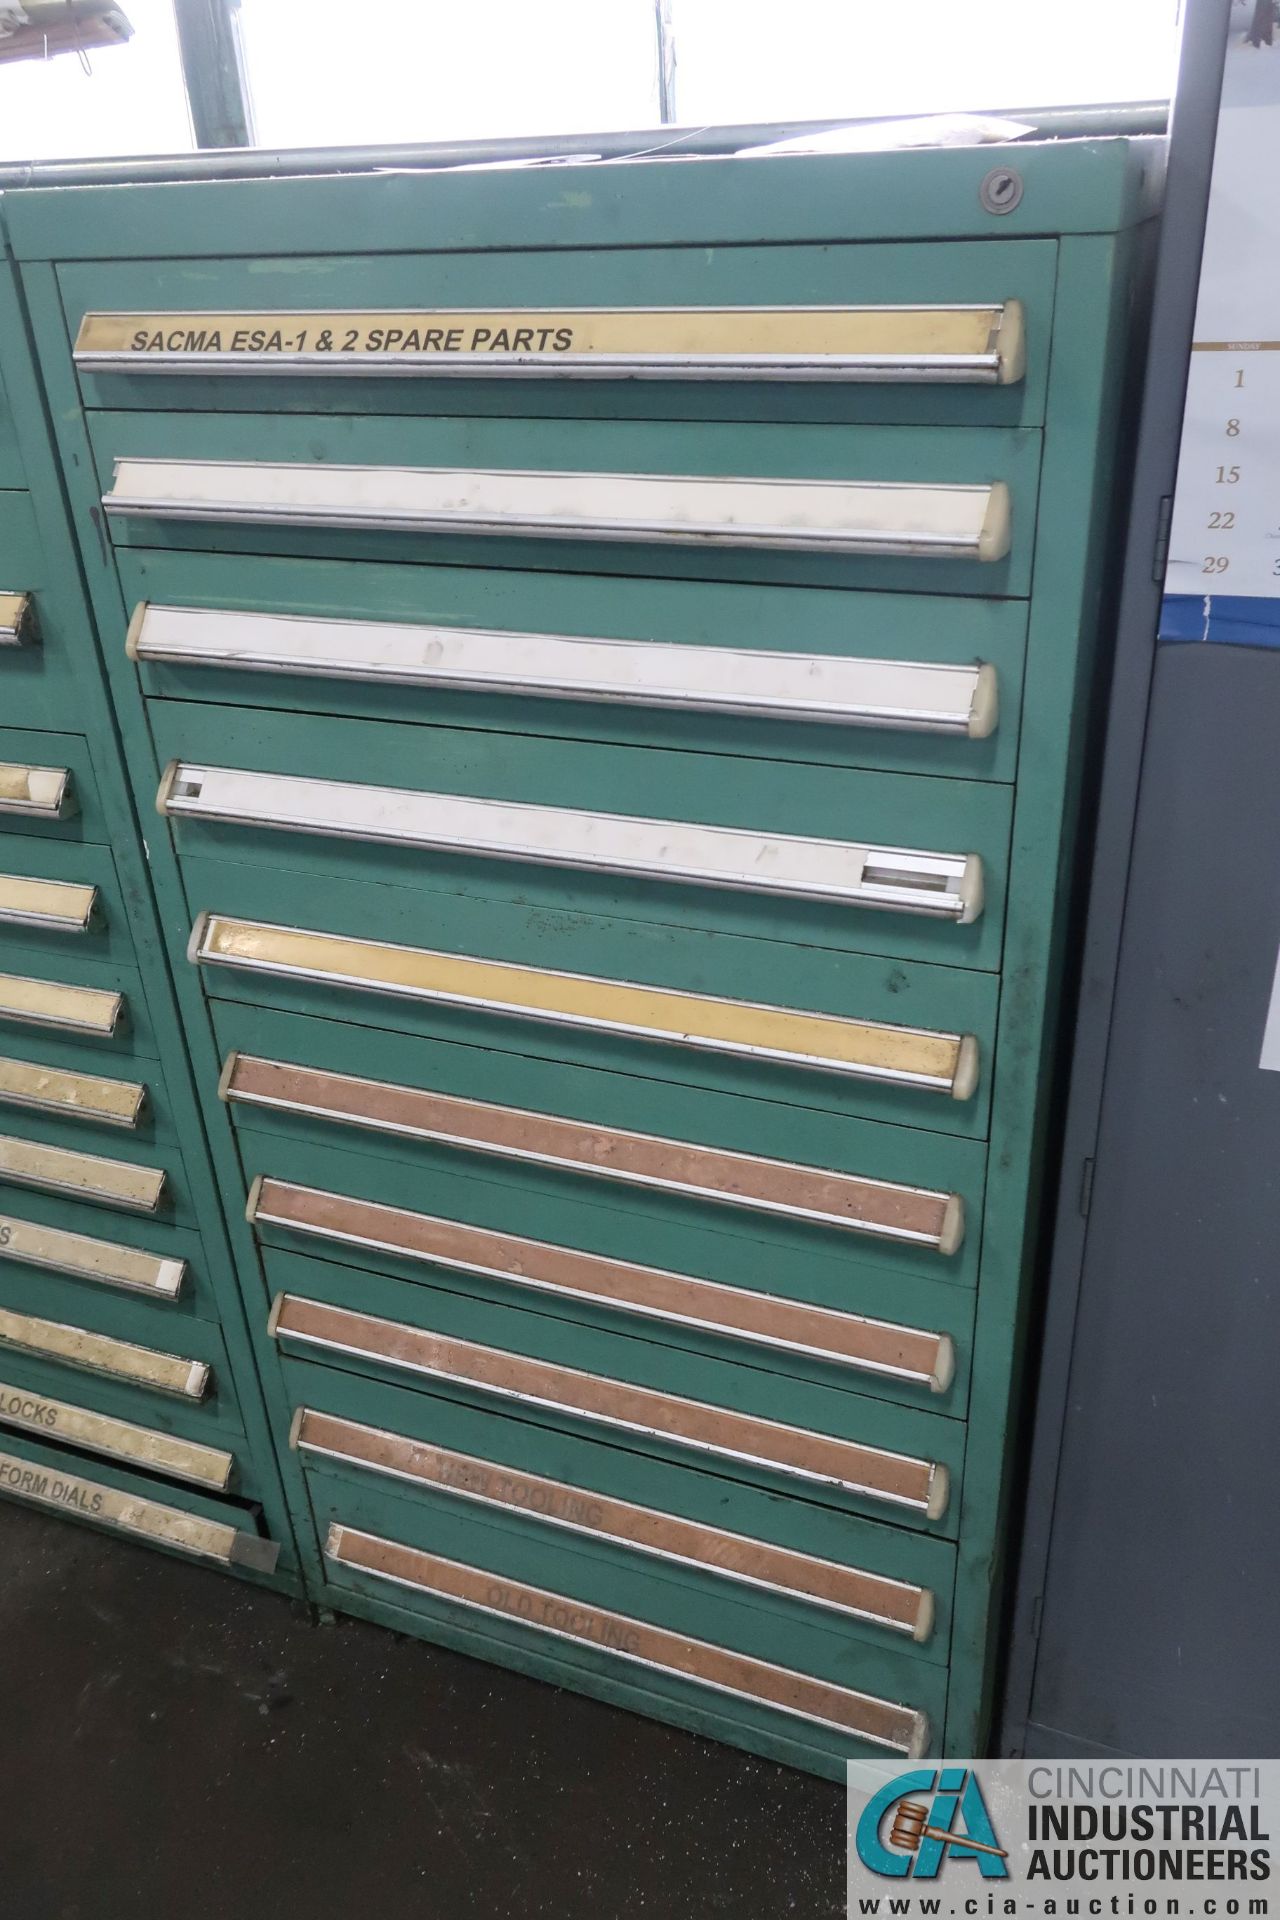 10-DRAWER LISTA-TYPE CABINET WITH SACMA TOOLING & PARTS - Loading fee due the "ERRA" Pedowitz